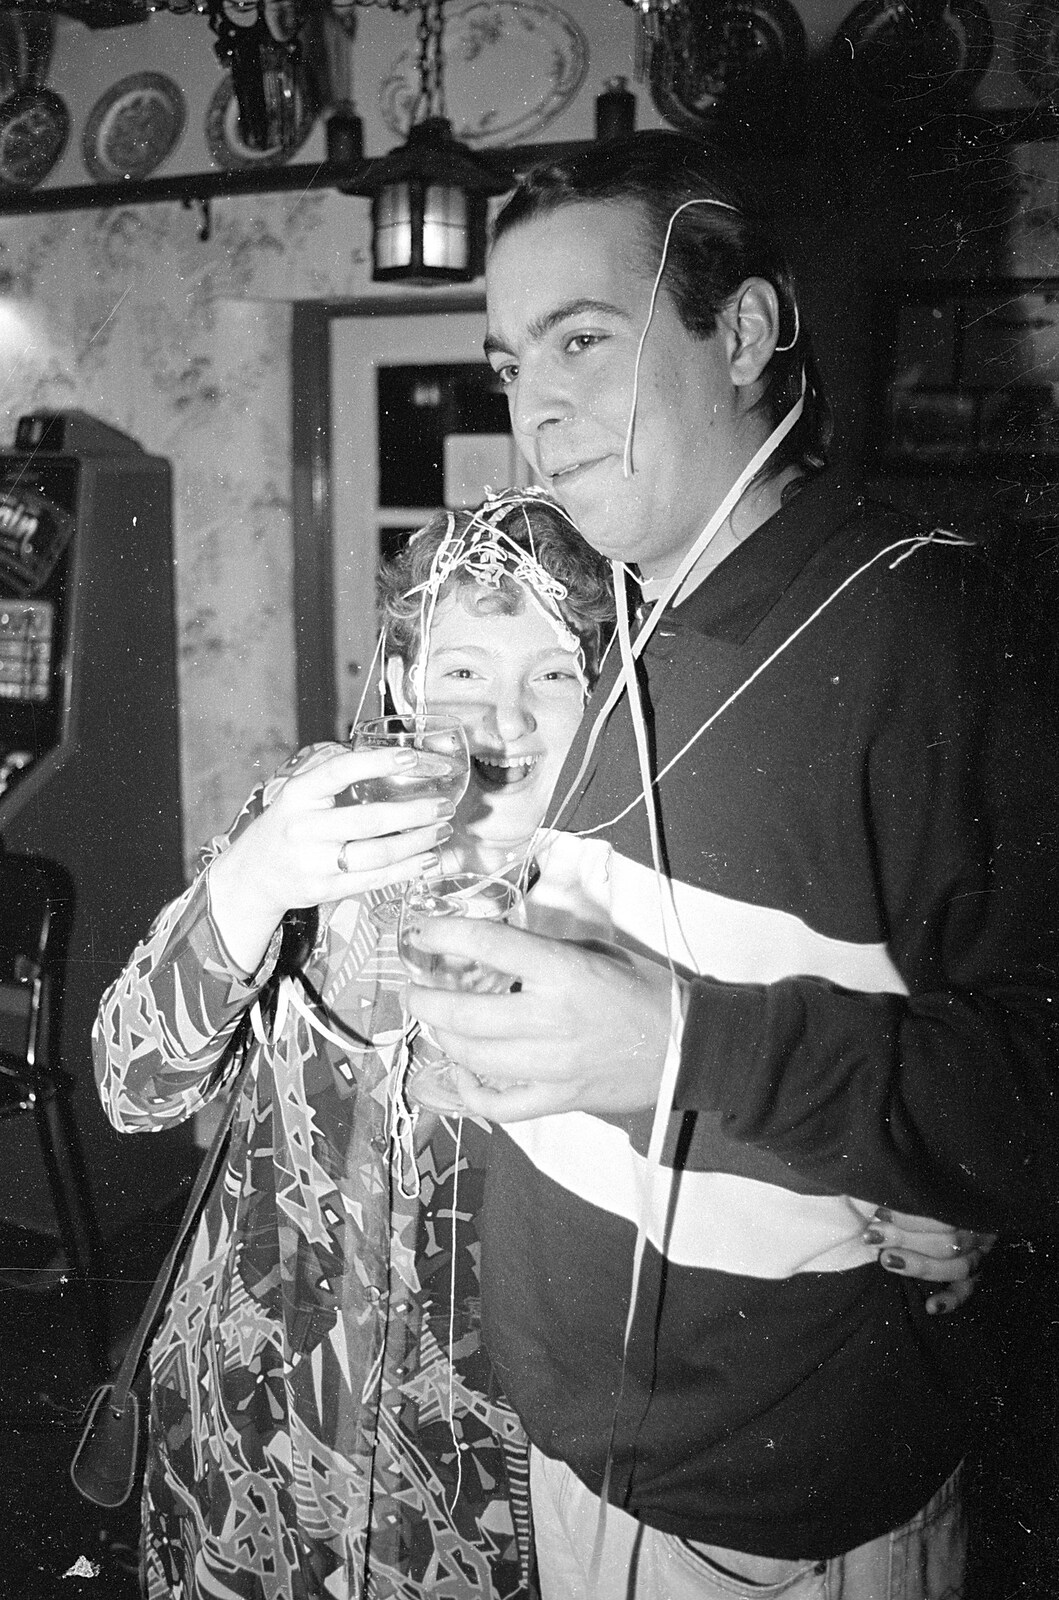 Sally and Doug are covered in streamers from New Year's Eve at the Swan Inn, Brome, Suffolk - 31st December 1992